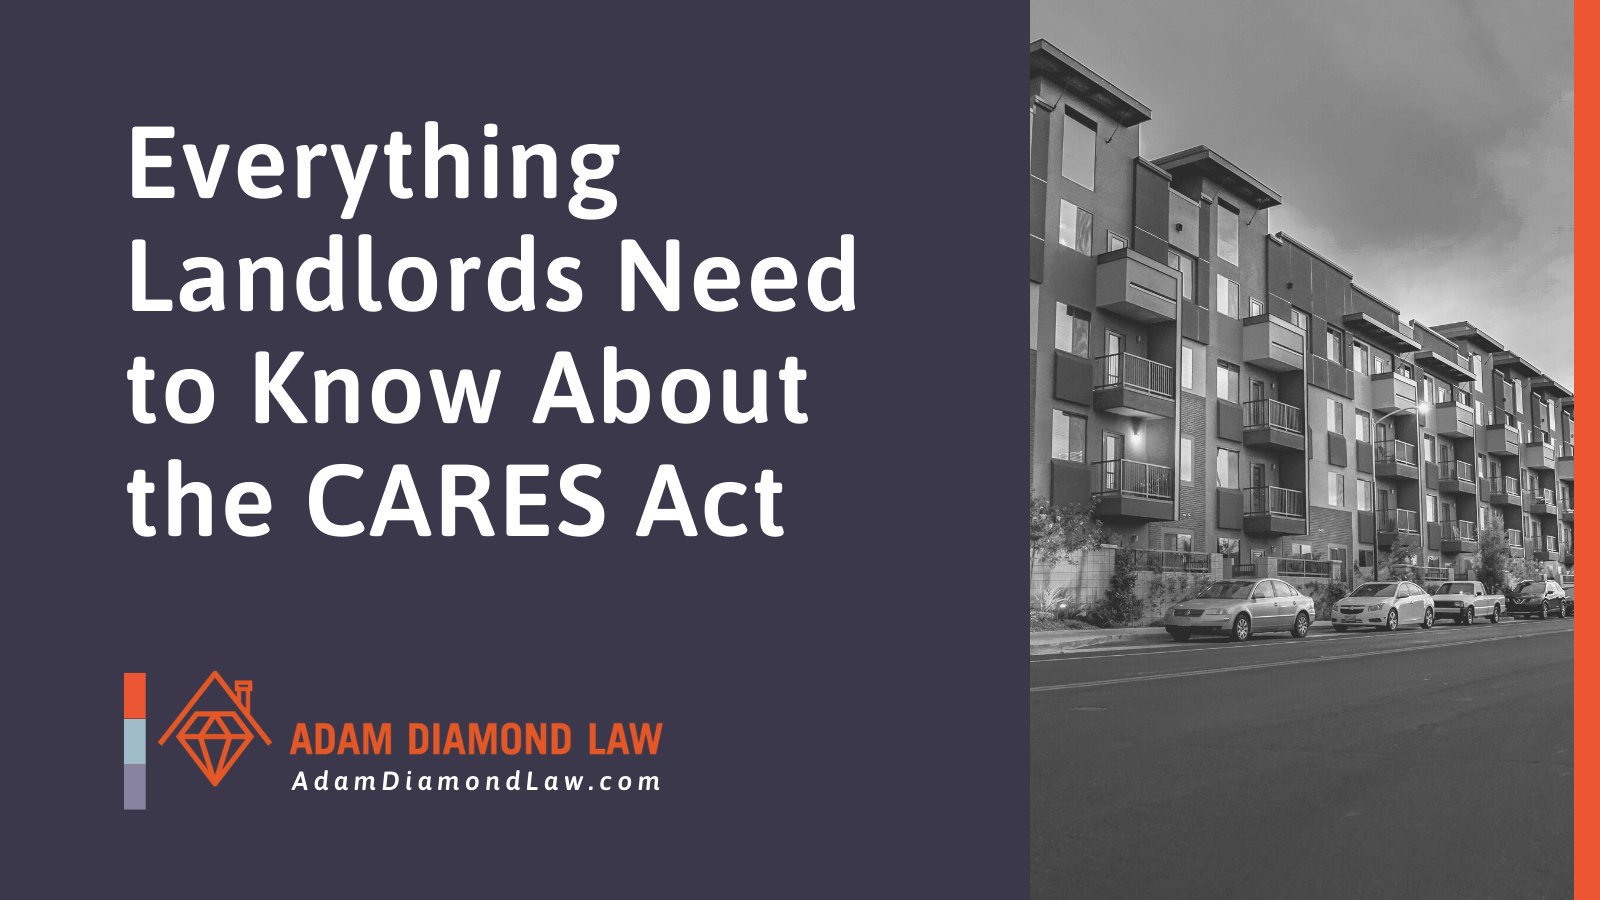 Everything Landlords Need to Know About the CARES Act - Adam Diamond Law | McHenry, IL Residential Real Estate Lawyer